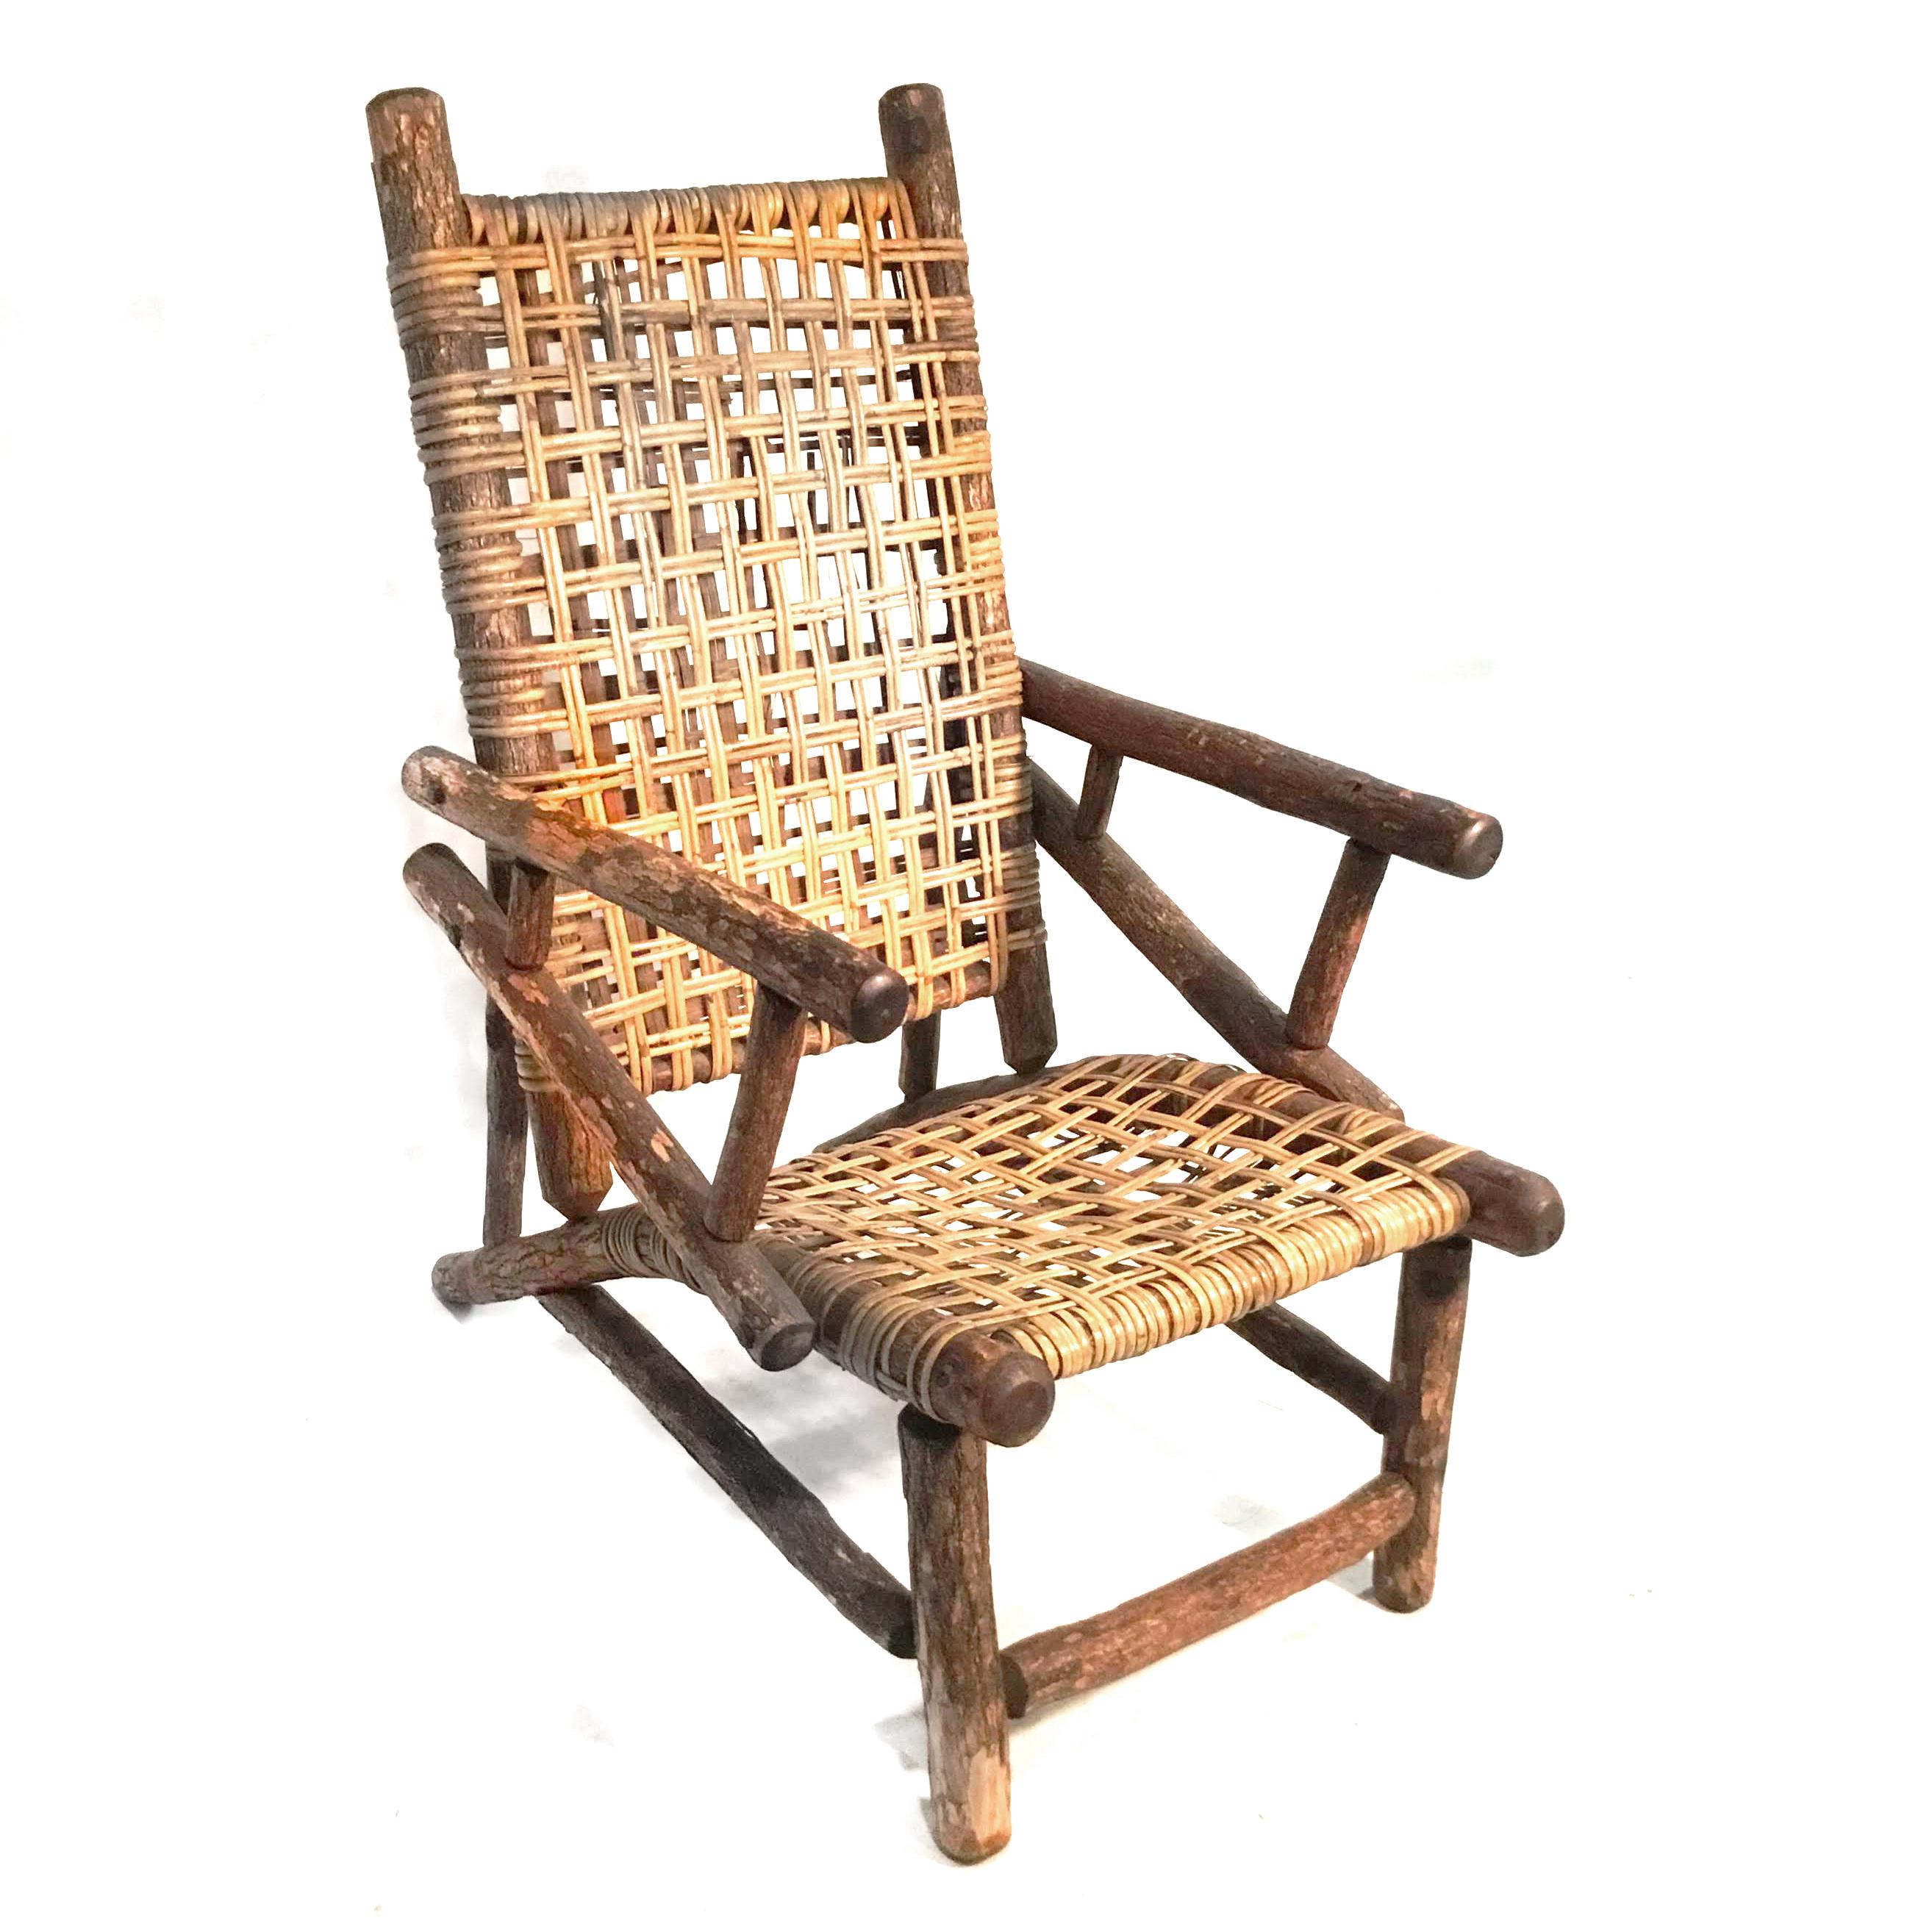 Pair of Old Hickory style chairs with wooden frames and rattan seats